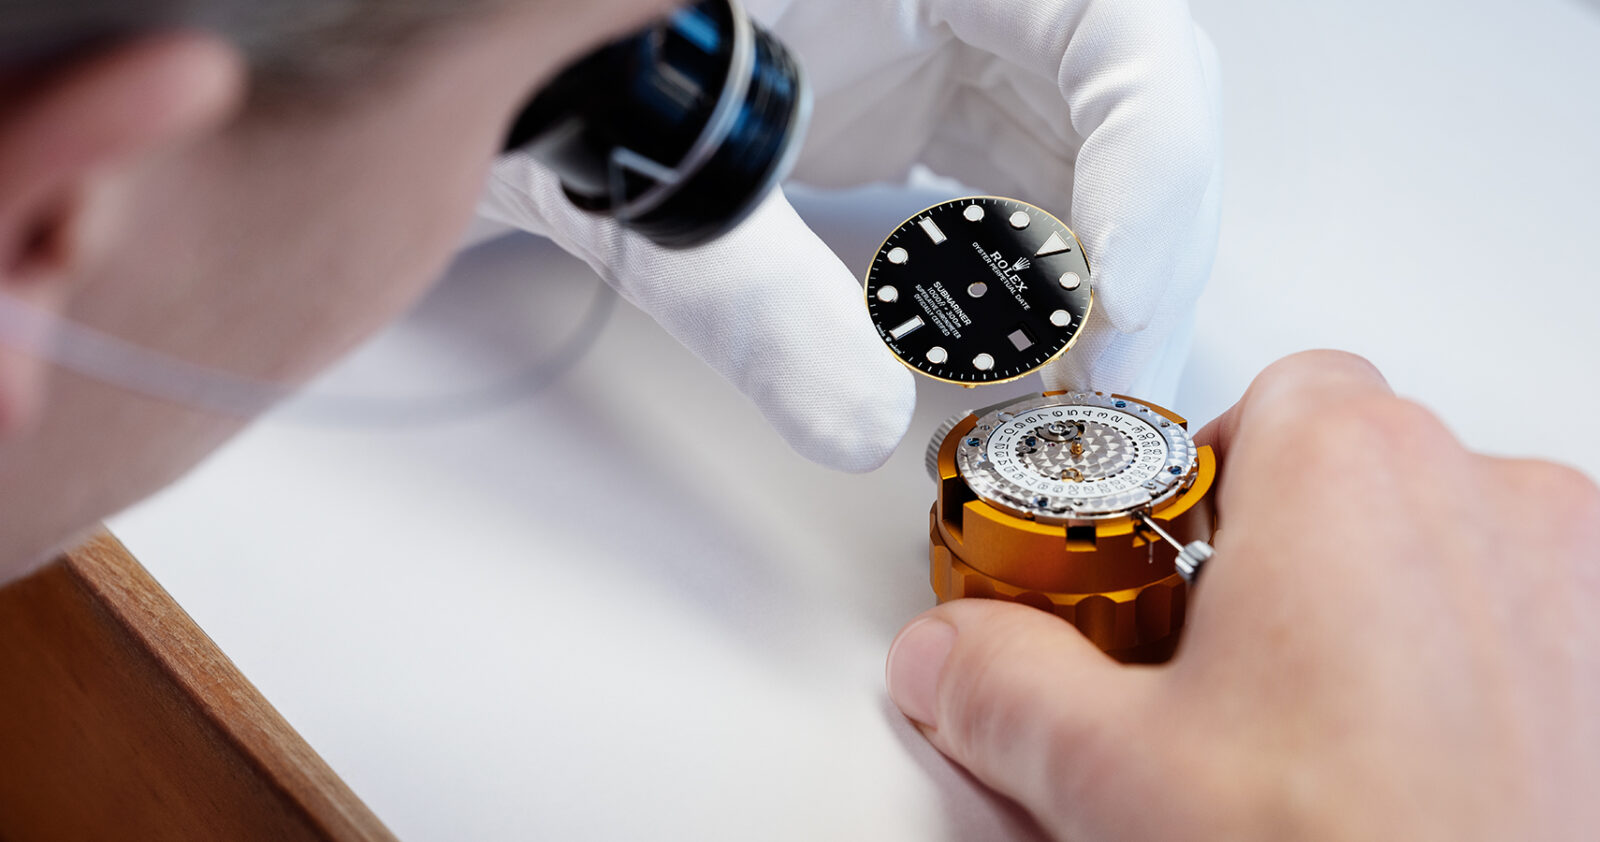 Rolex is host to a variety of professions, brought to life by employees who are experts in their fields.